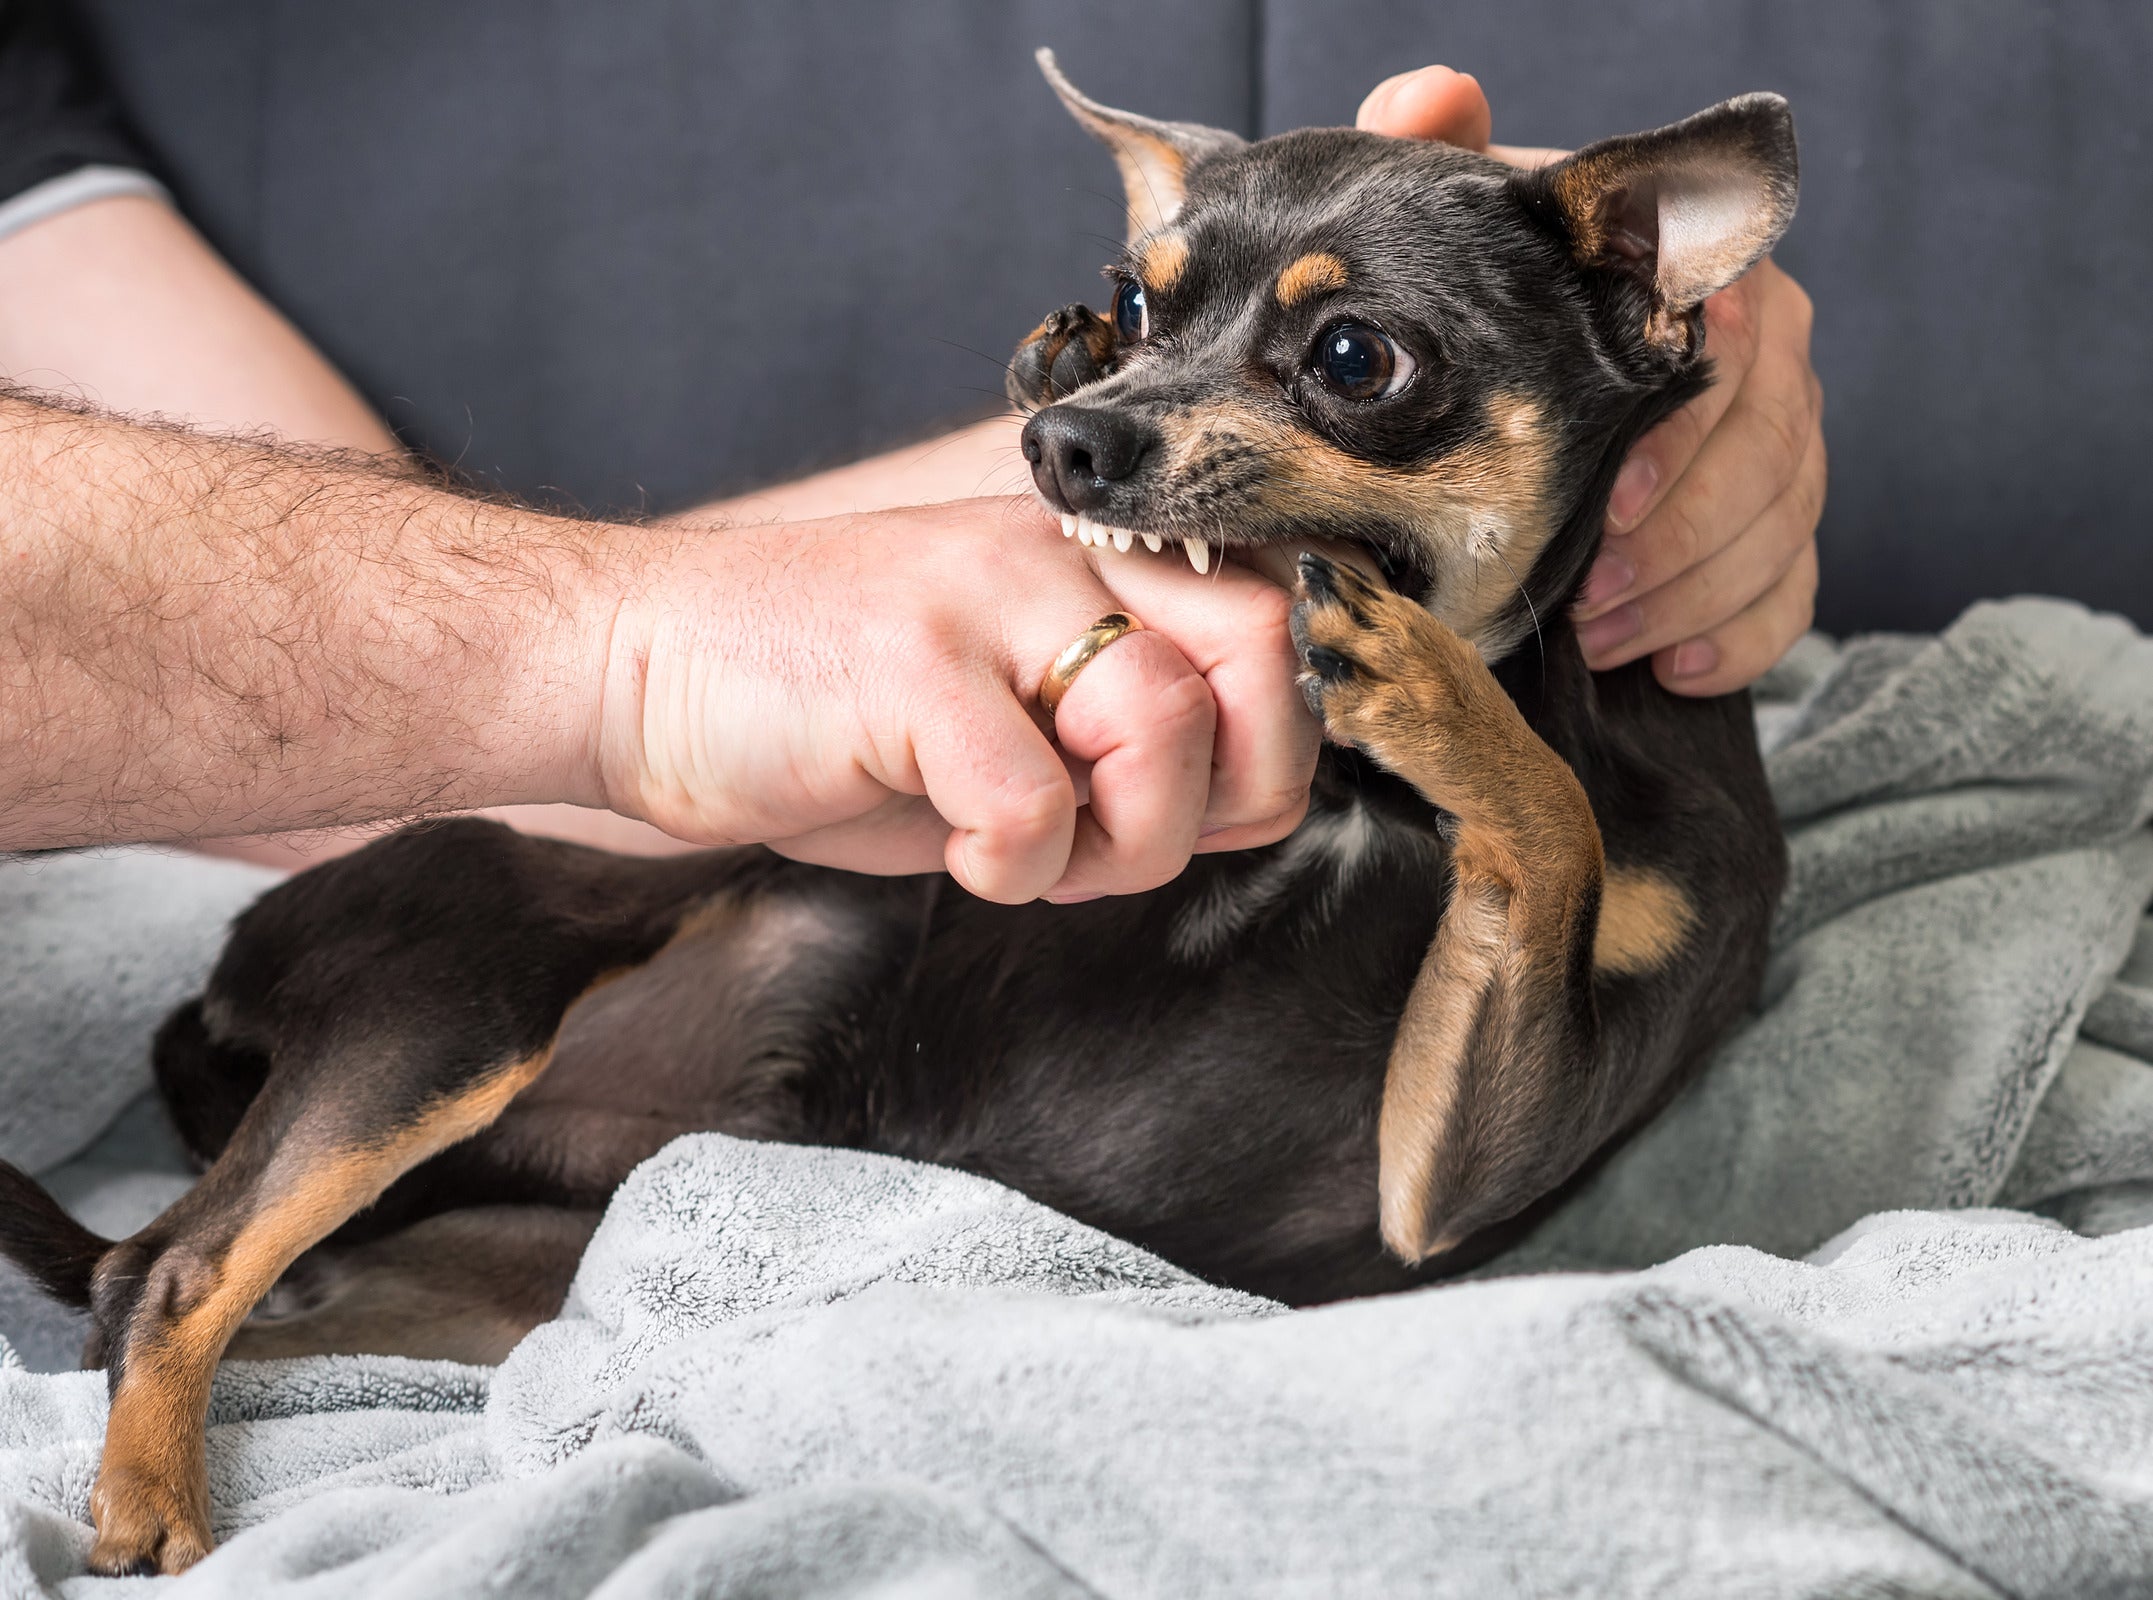 There are five risk factors that can lead to tetanus after a minor dog bite